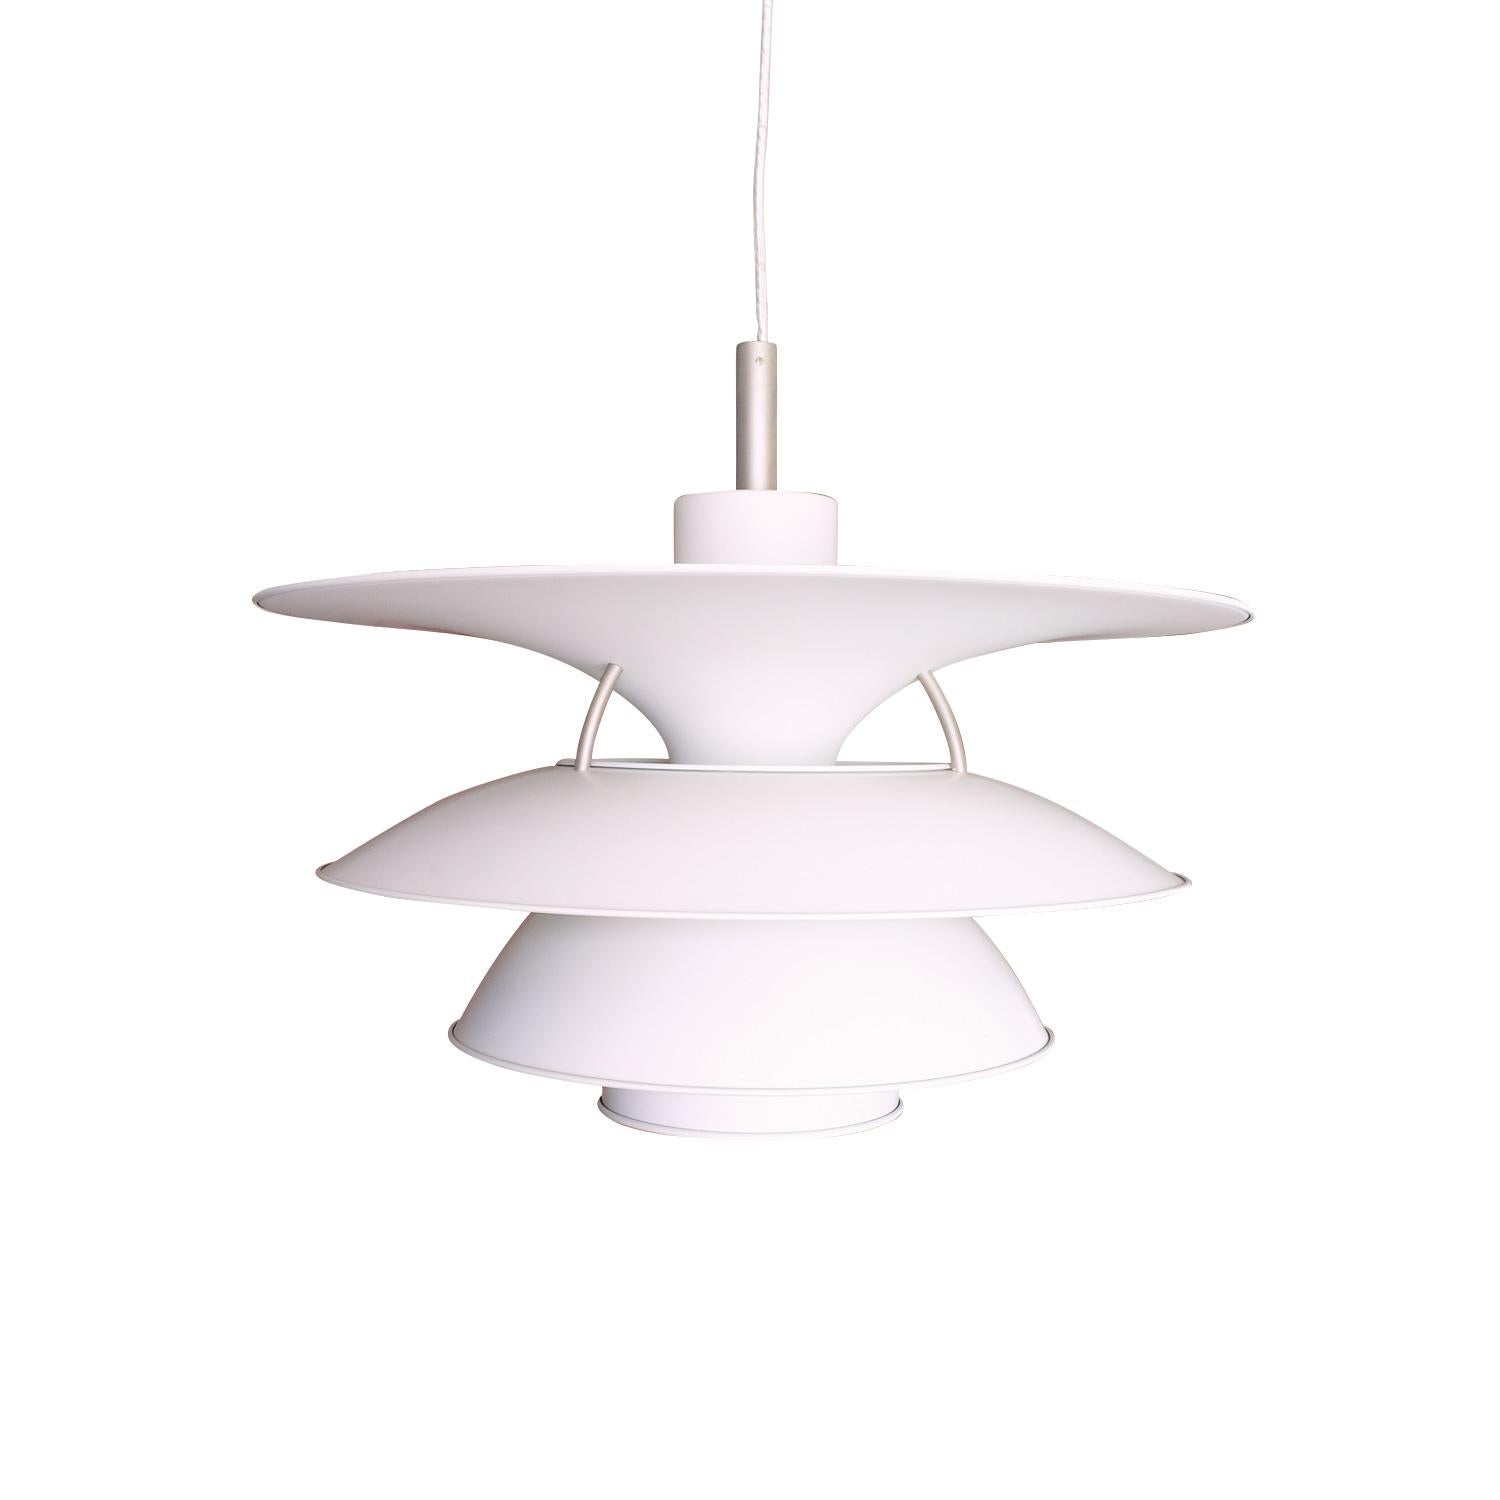 Poul Henningsen’s PH 6½-6 Charlottenburg ceiling lamp produced by Louis Poulsen, Denmark.

Lamp is in very good condition, no scratches or noticeable signs of wear, they have been tested and provided with new wiring and metal support cables.